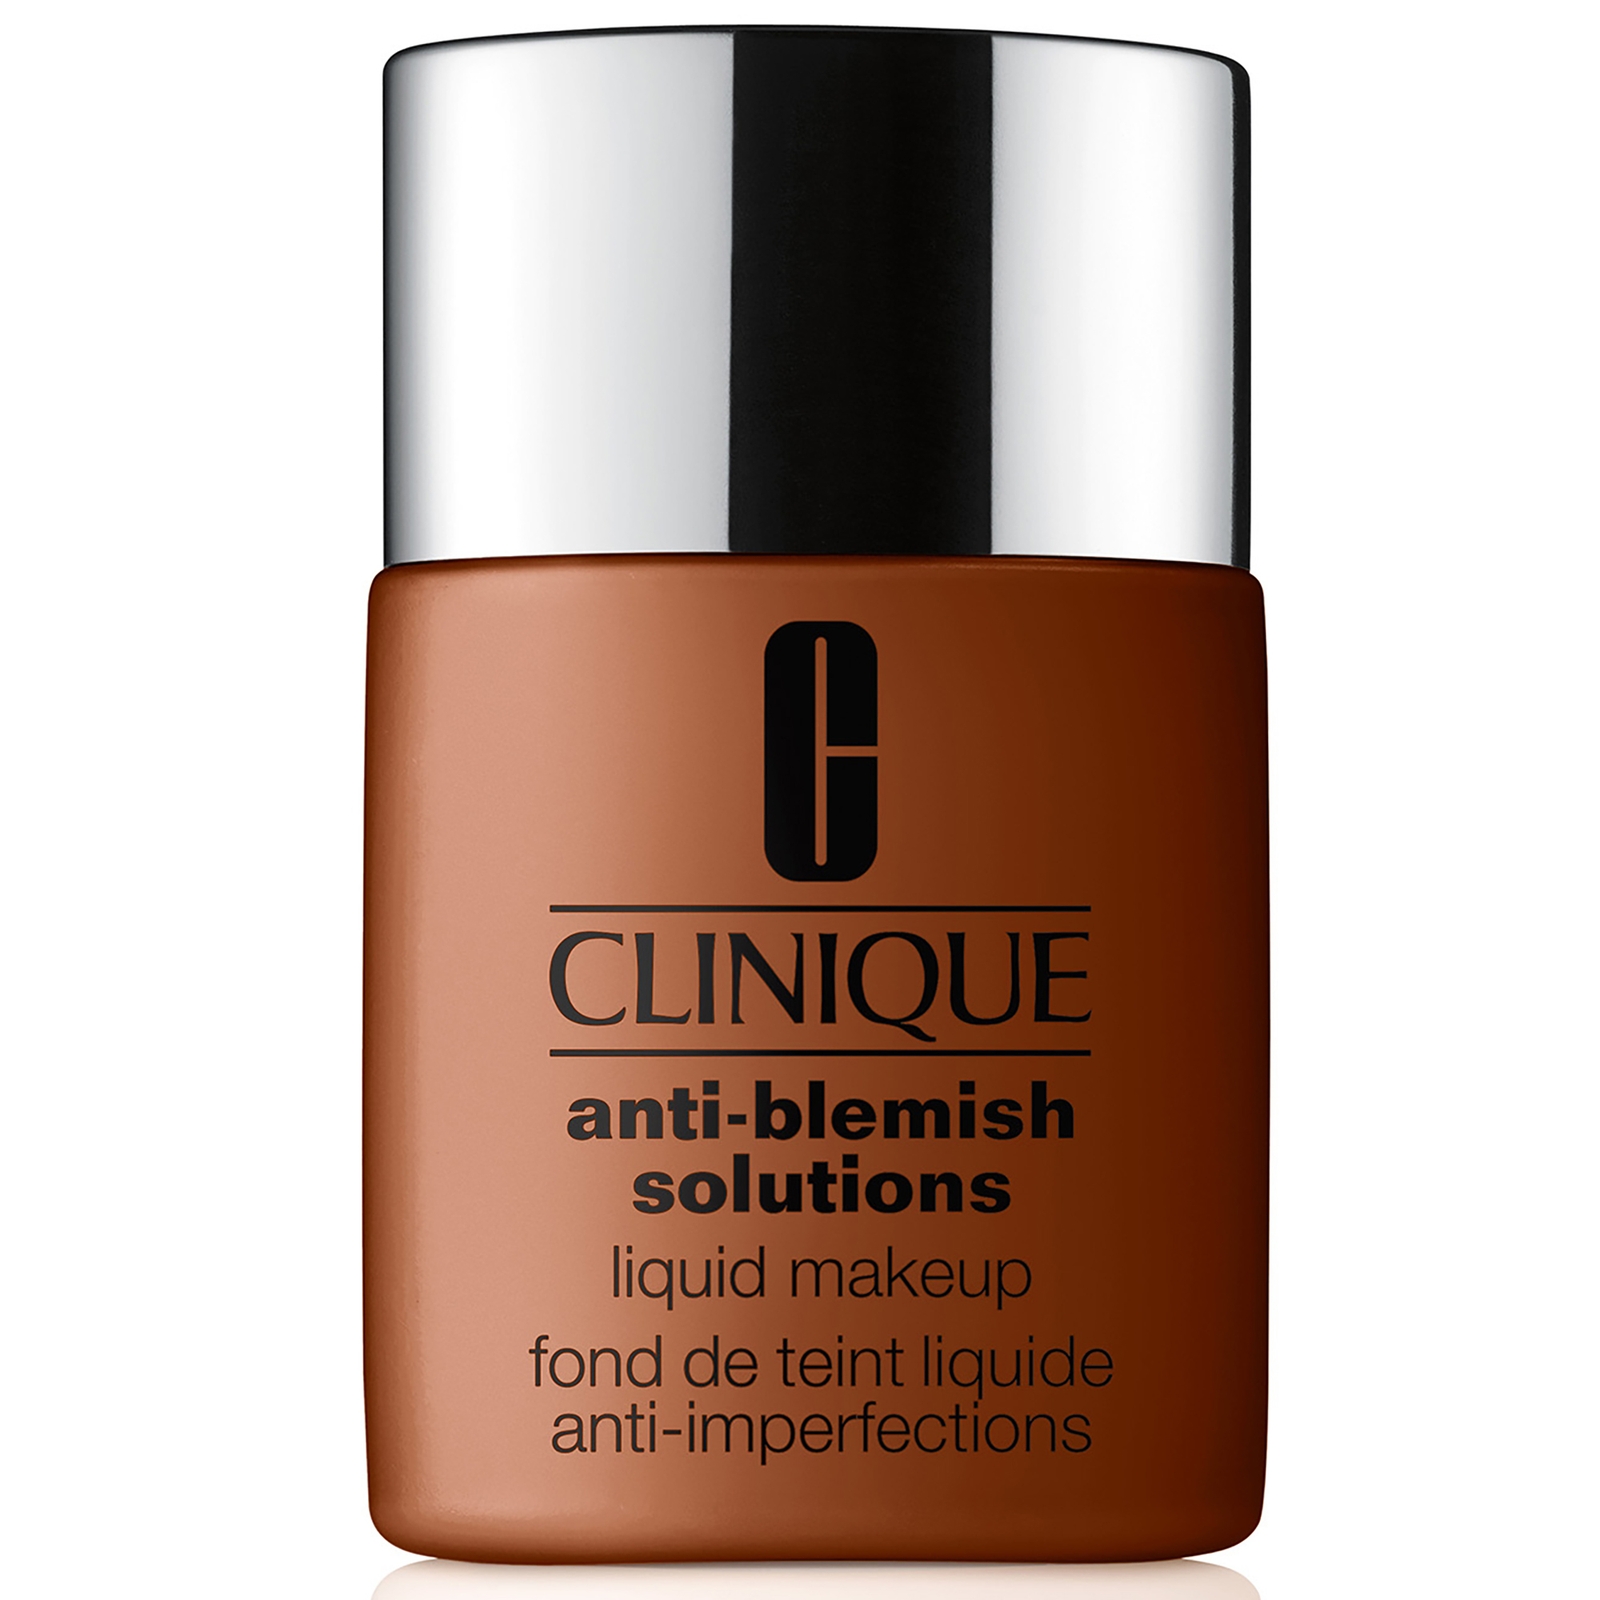 Clinique Anti-Blemish Solutions Liquid Makeup with Salicylic Acid 30ml (Various Shades) - WN 122 Clo